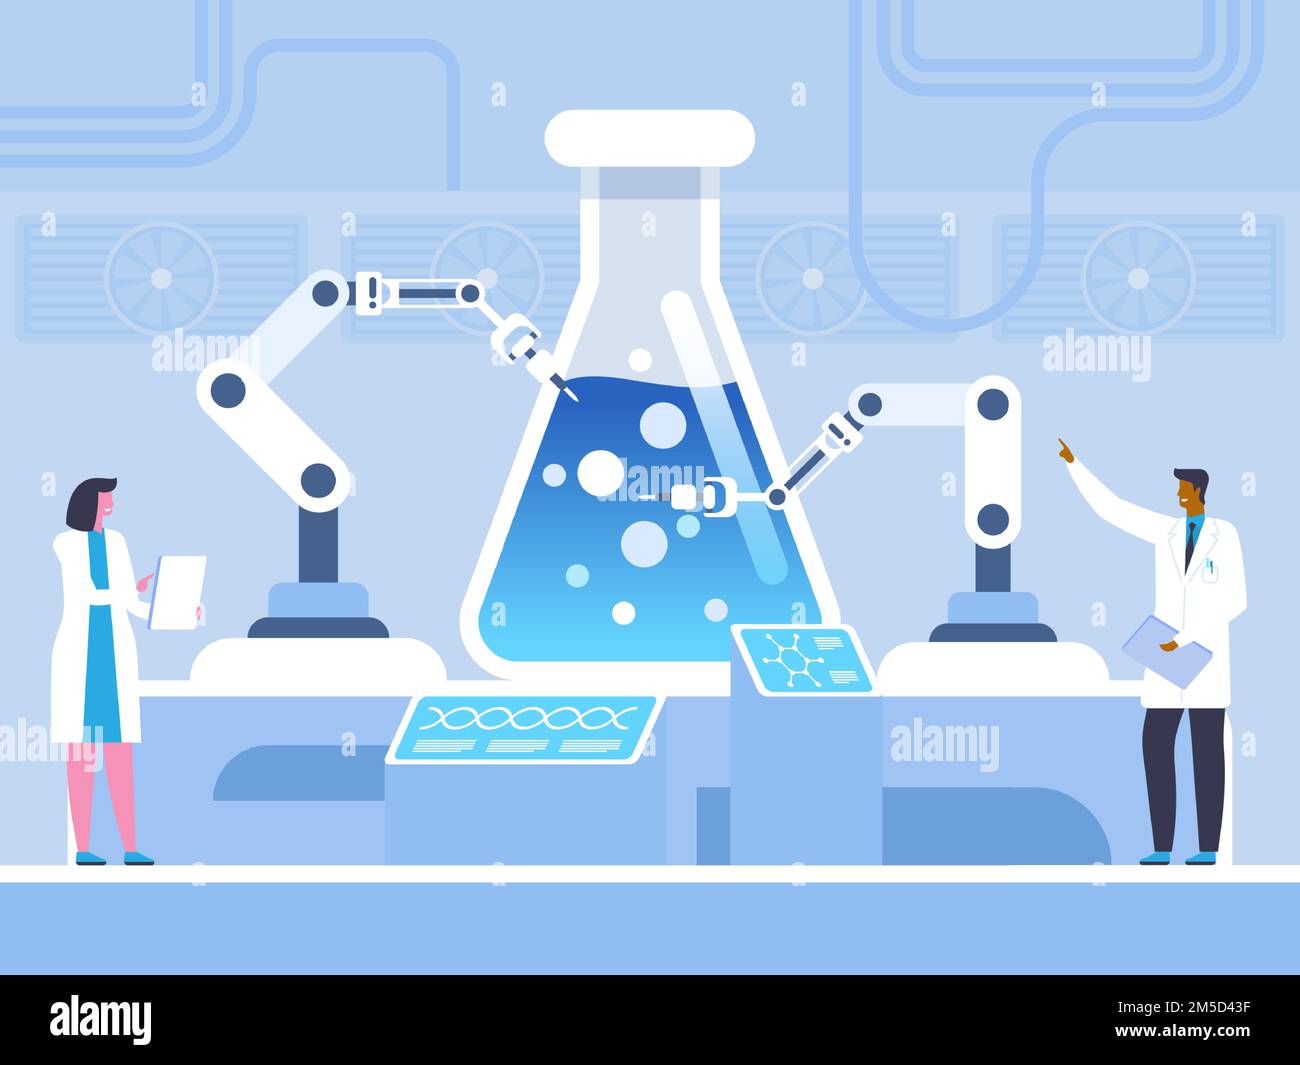 Biochemical experiment flat vector illustration. Doctors, chemists in white coats cartoon characters. Scientists studying chemical reaction, genetic e Stock Vector